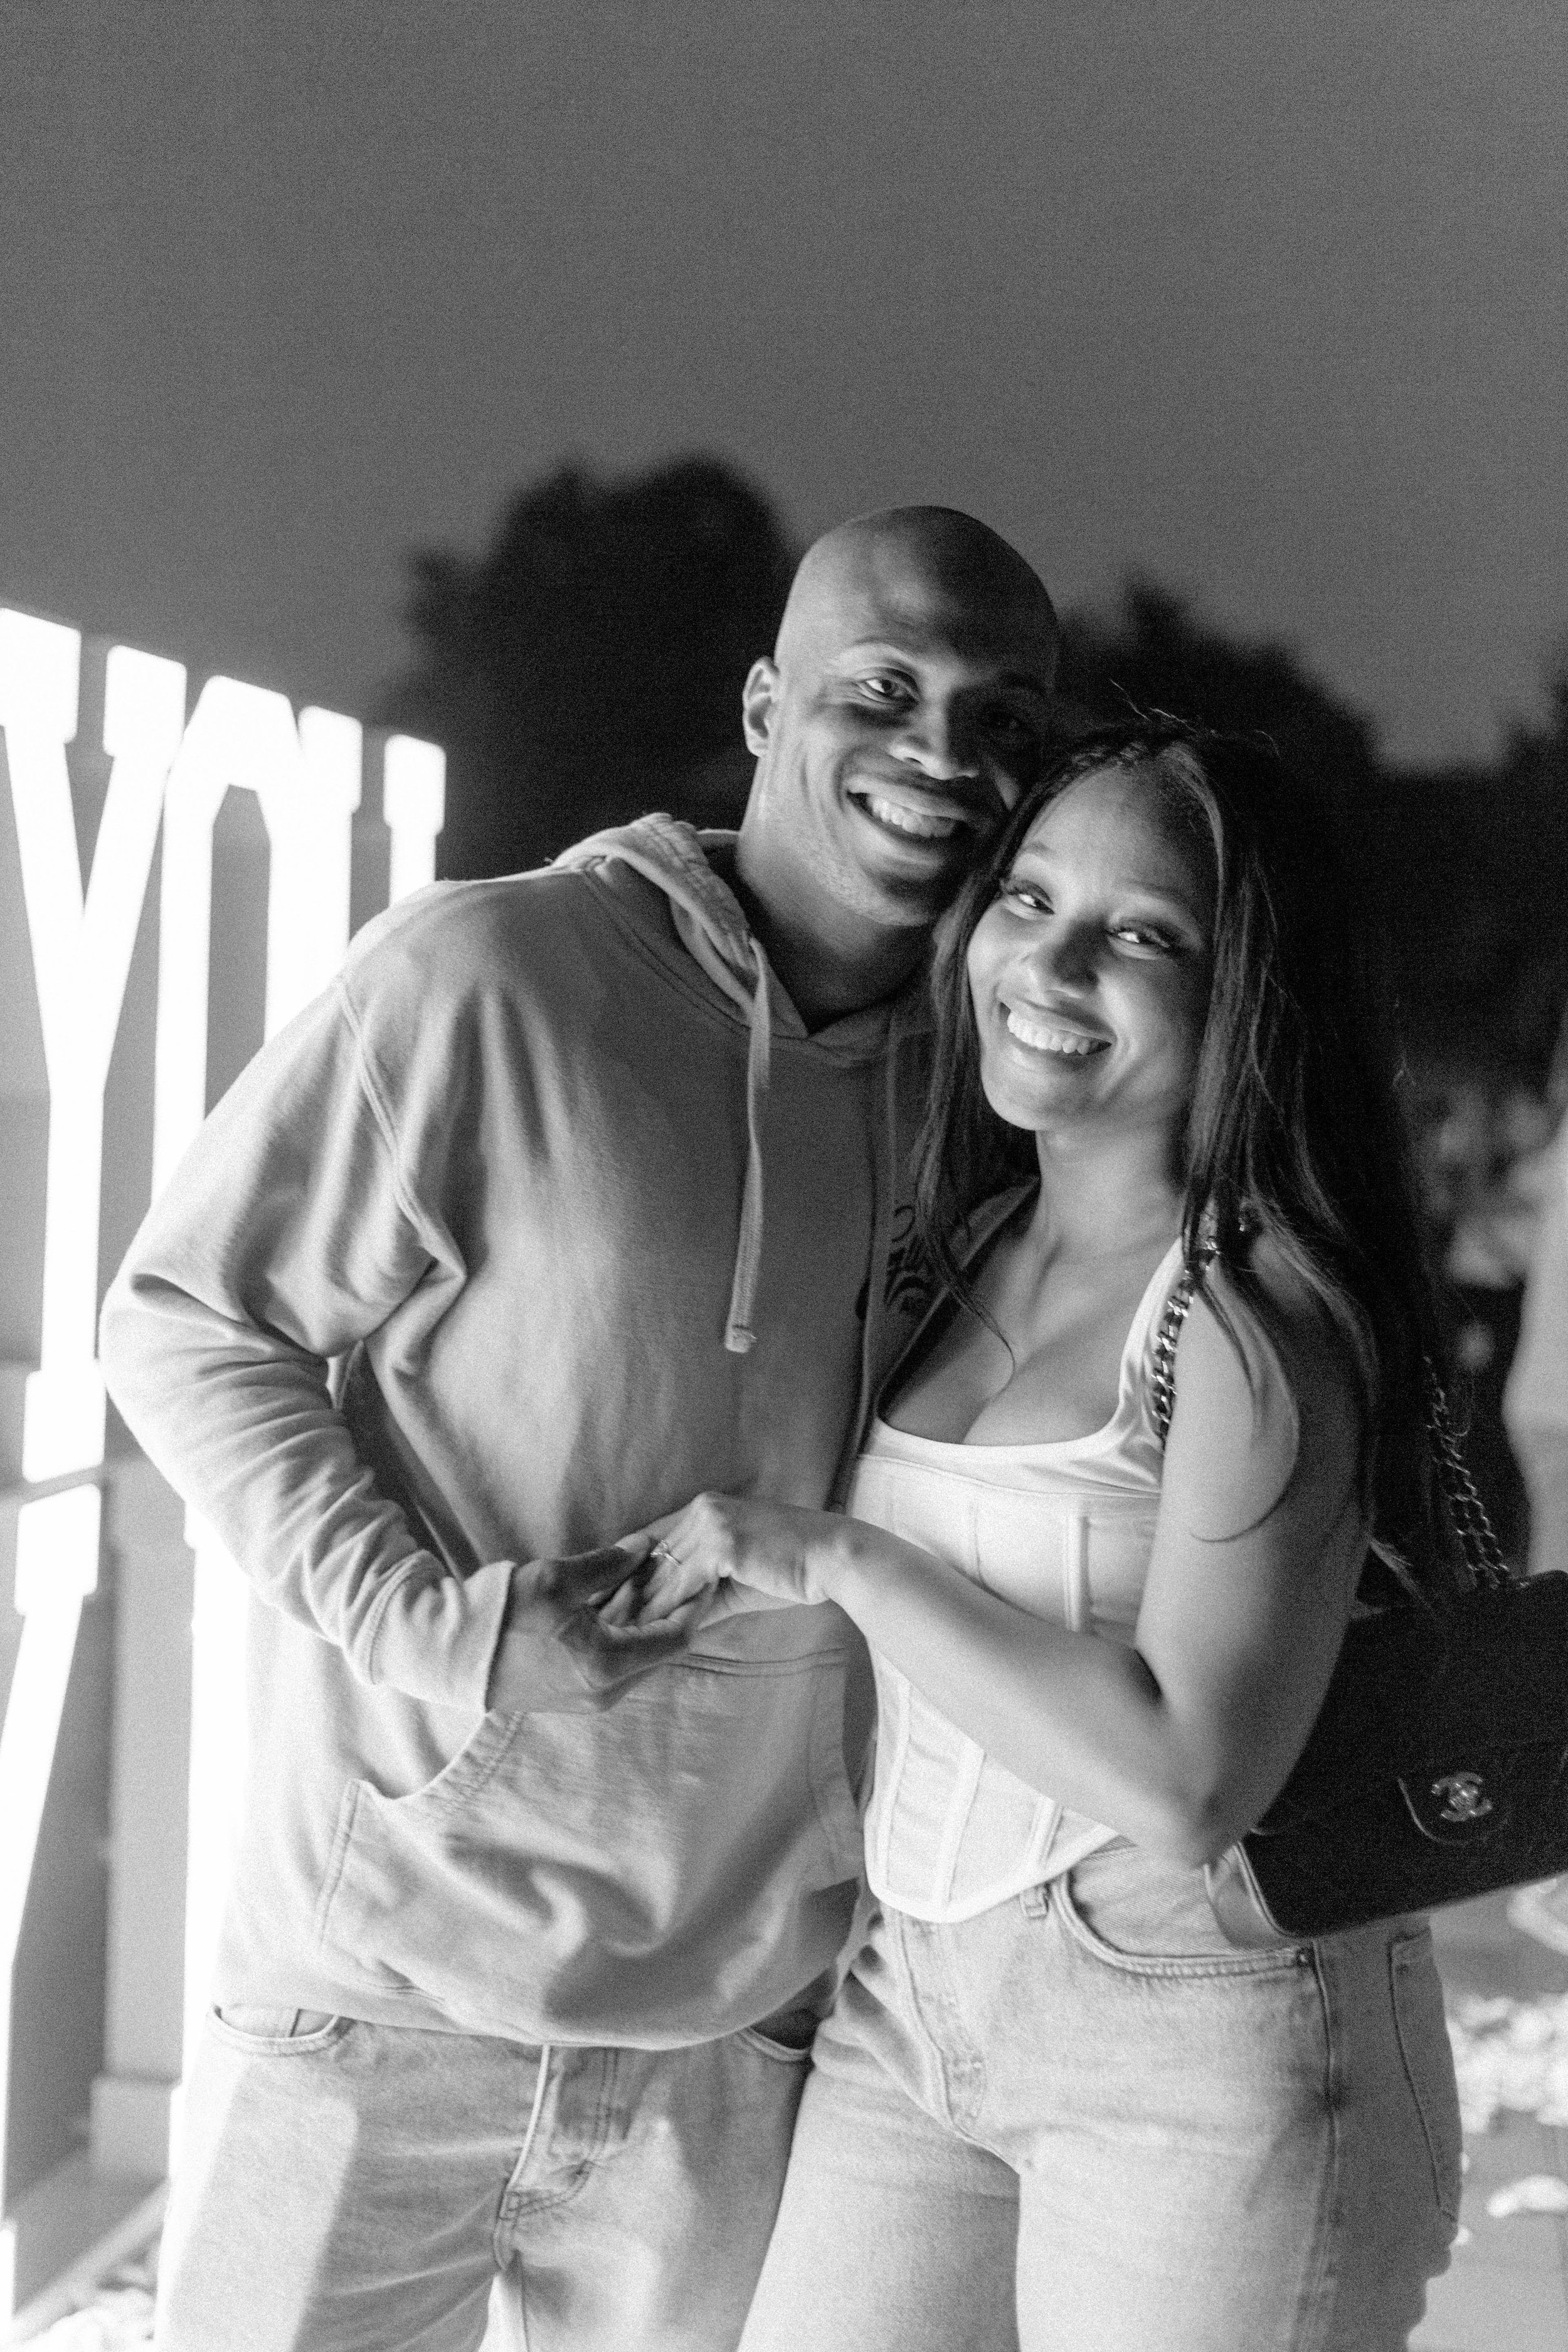 pacific-engagements-wedding-planning-and-design-seattle-seahawks-tyler-lockett-fiance-lauren-jackson-engaged-at-kerry-park-seattle-kerry-jeanne-photography